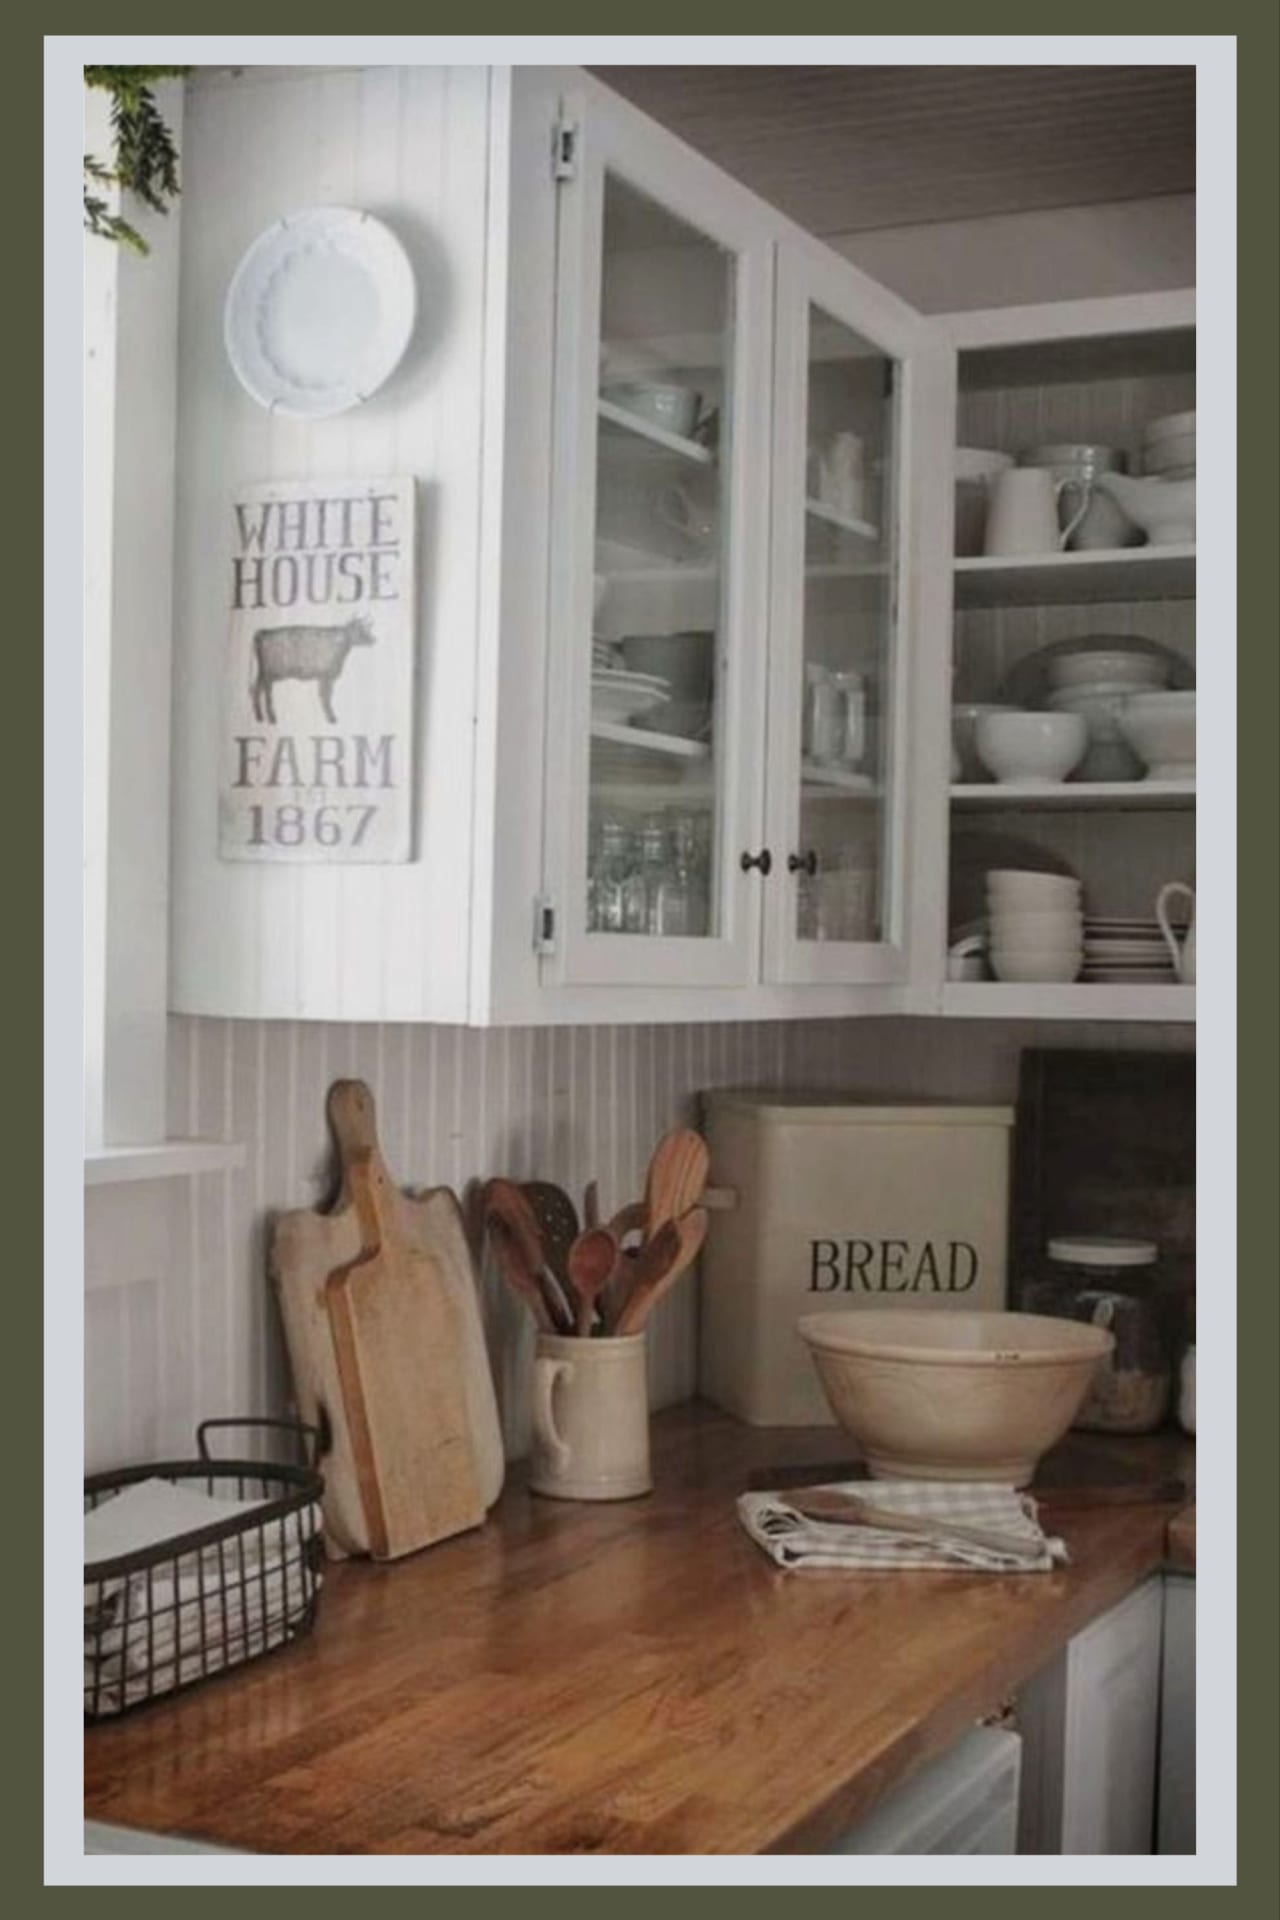 Farmhouse kitchen decorating ideas - country farmhouse kitchen canisters and decor idea - farmhouse canisters we love!